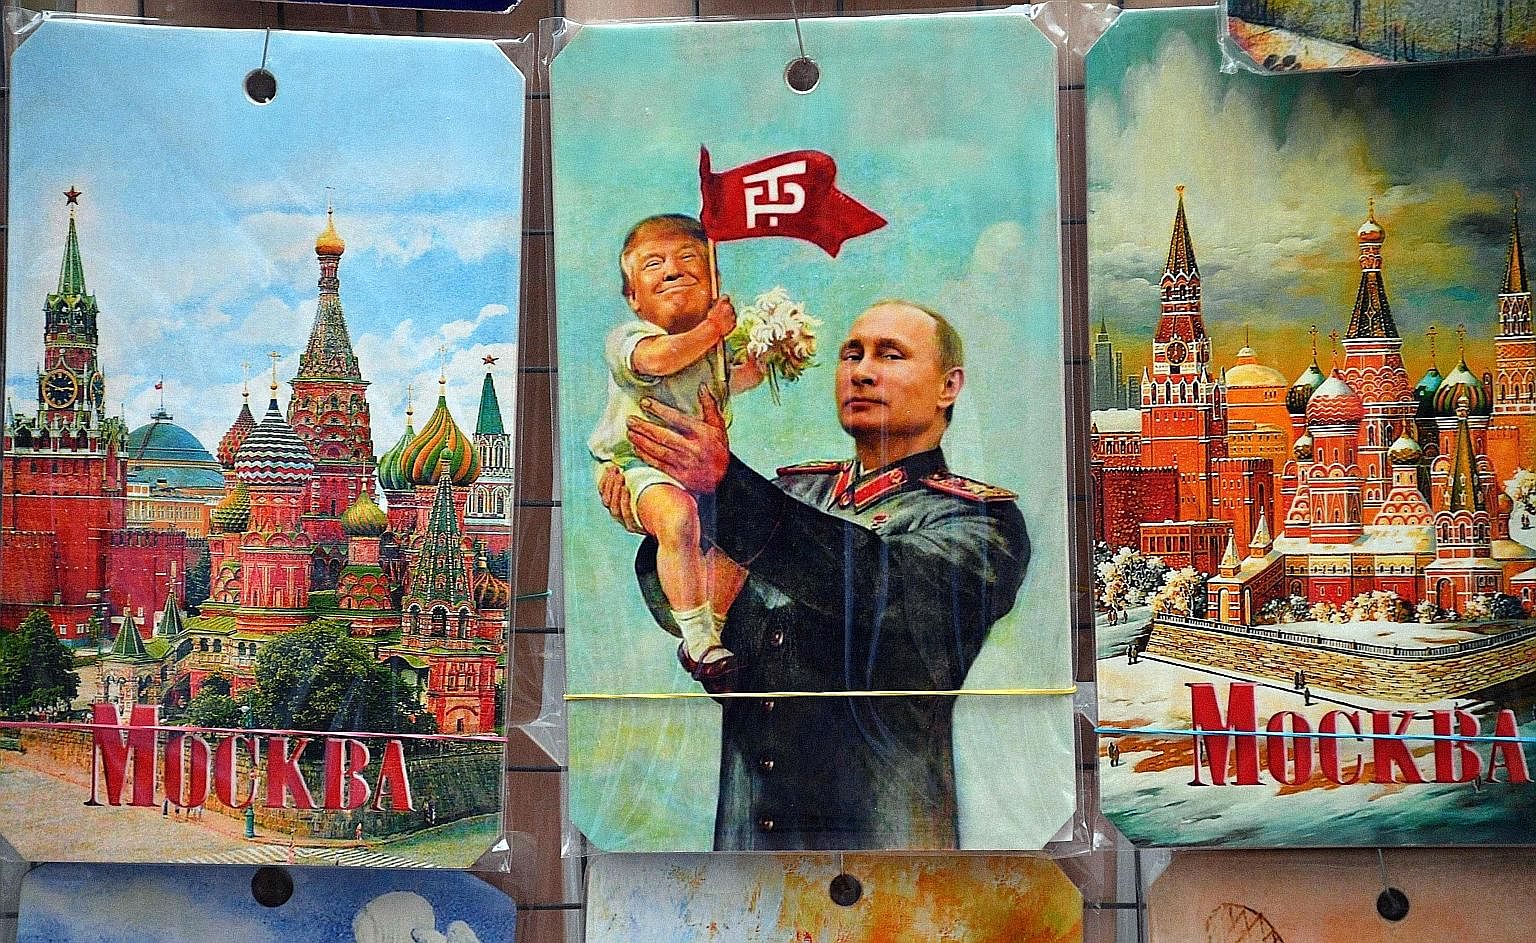 A drawing on sale in a souvenir shop in Moscow depicting Russian President Vladimir Putin holding a baby with the face of US President Donald Trump, based on an old propaganda poster showing former Soviet leader Joseph Stalin holding a baby. The firs